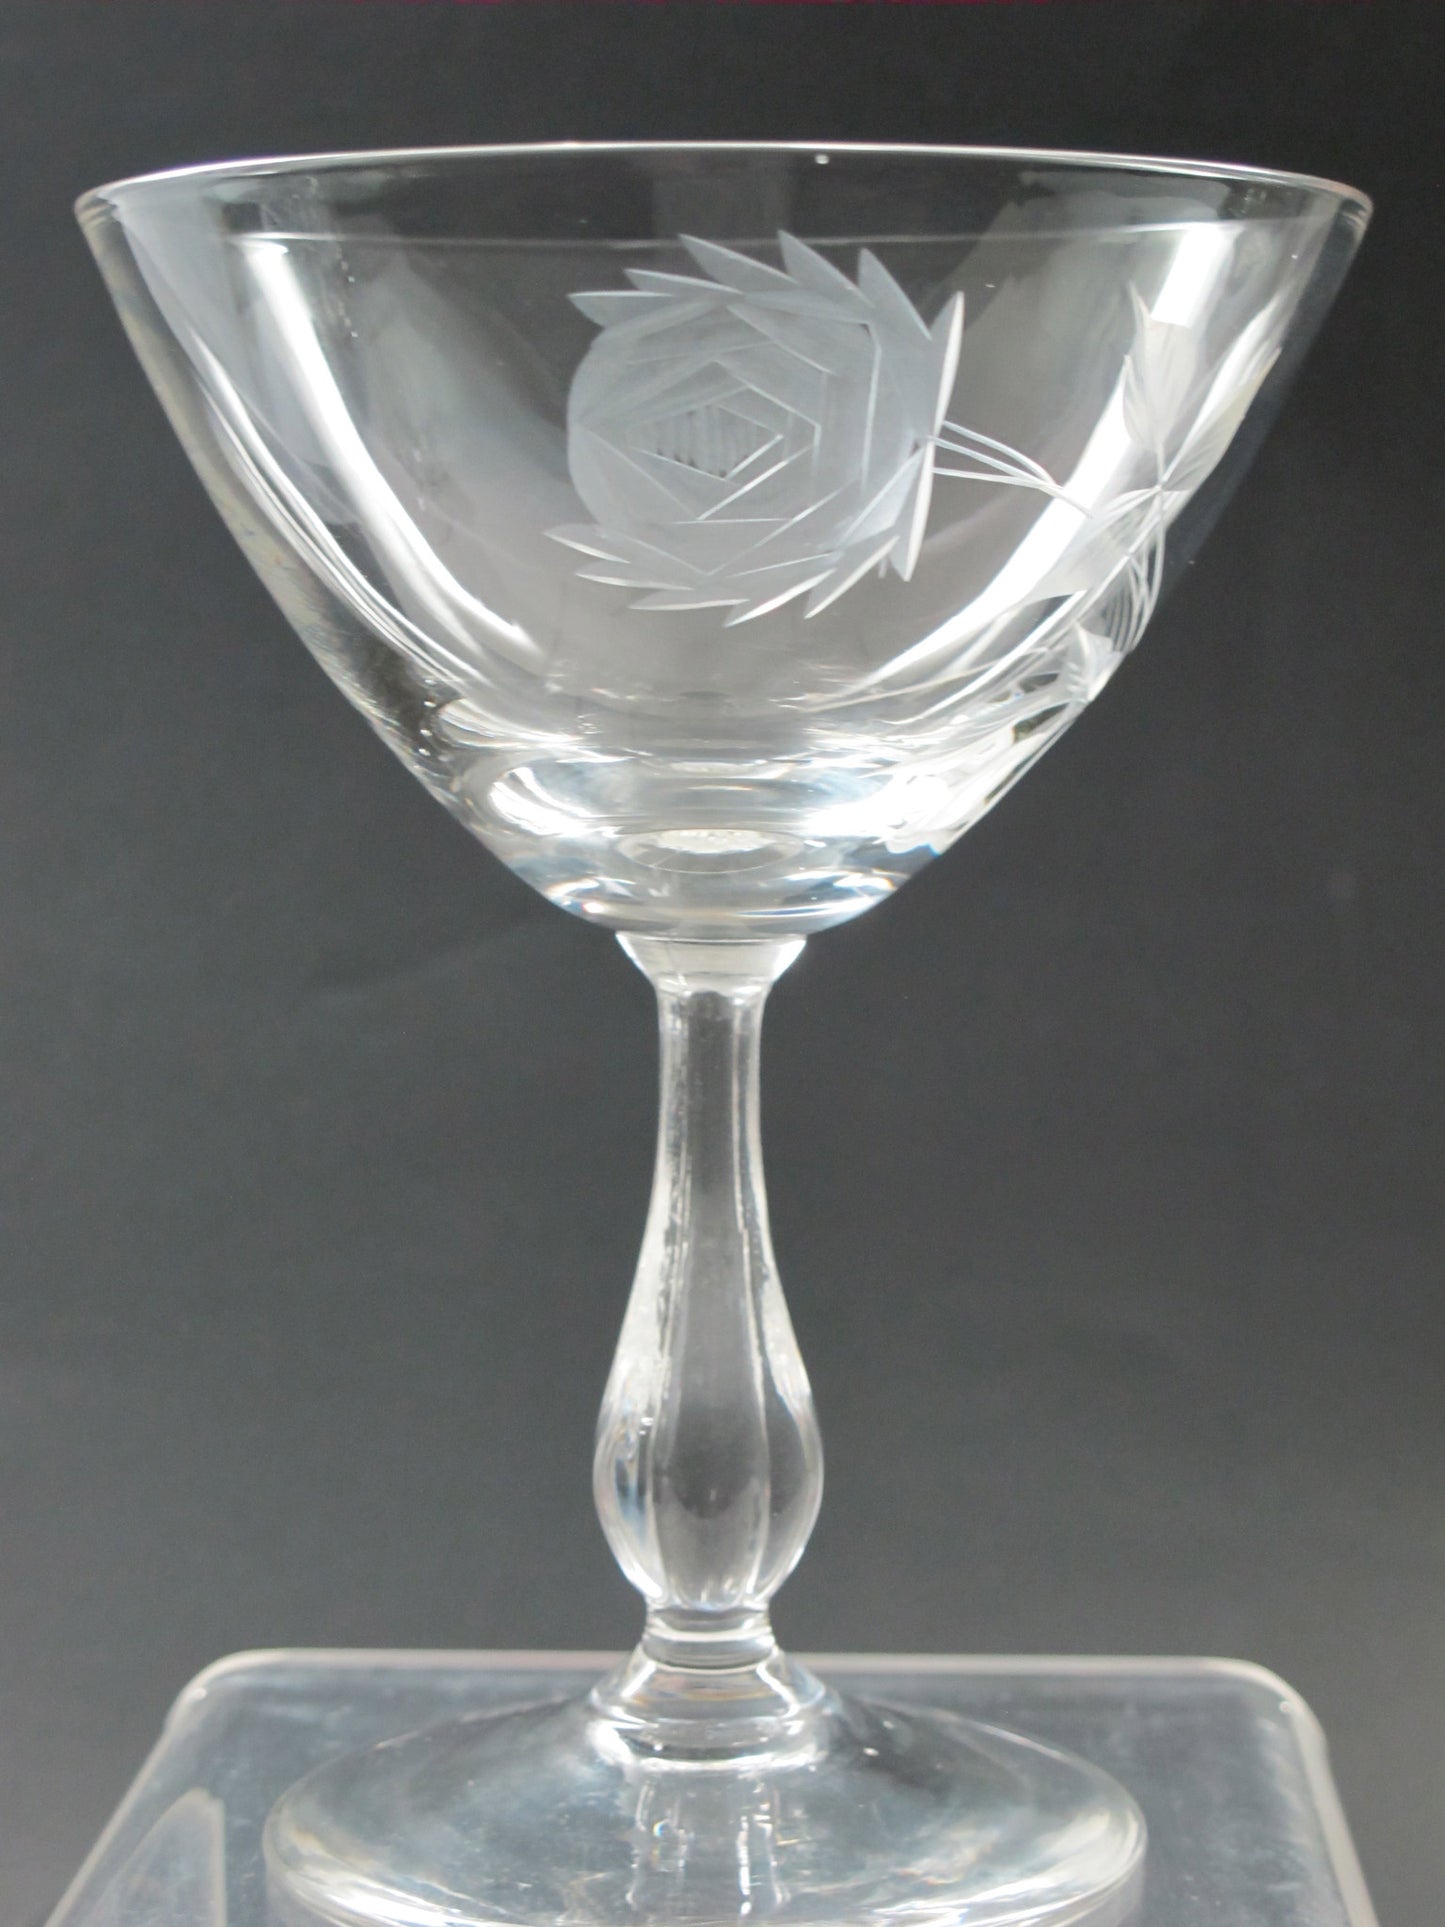 Bryce dessert glass Rose pattern Hand cut  Crystal  Made in USA Mt Pleasant PA - O'Rourke crystal awards & gifts abp cut glass